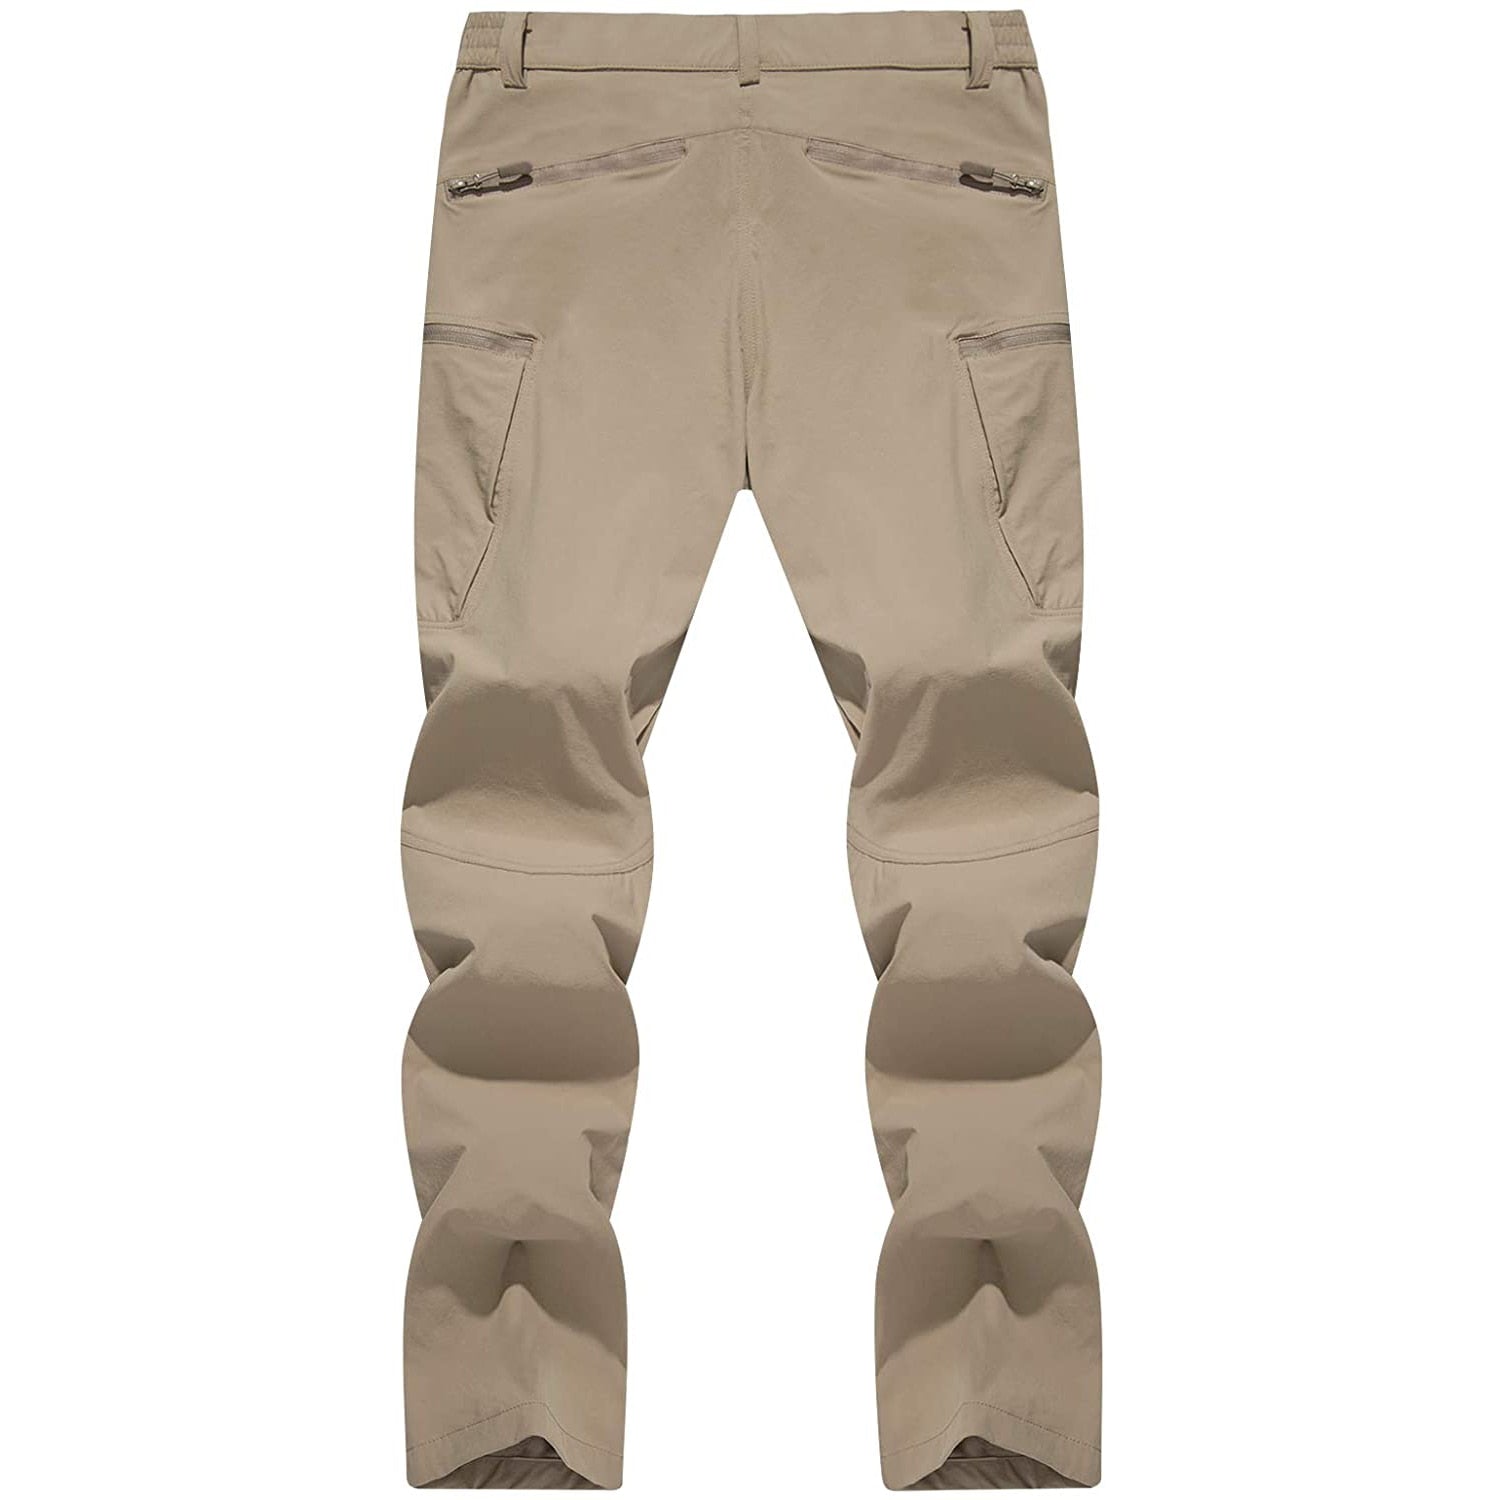 Men's khaki coloured pants pants with zip pockets on the back and on the legs. 